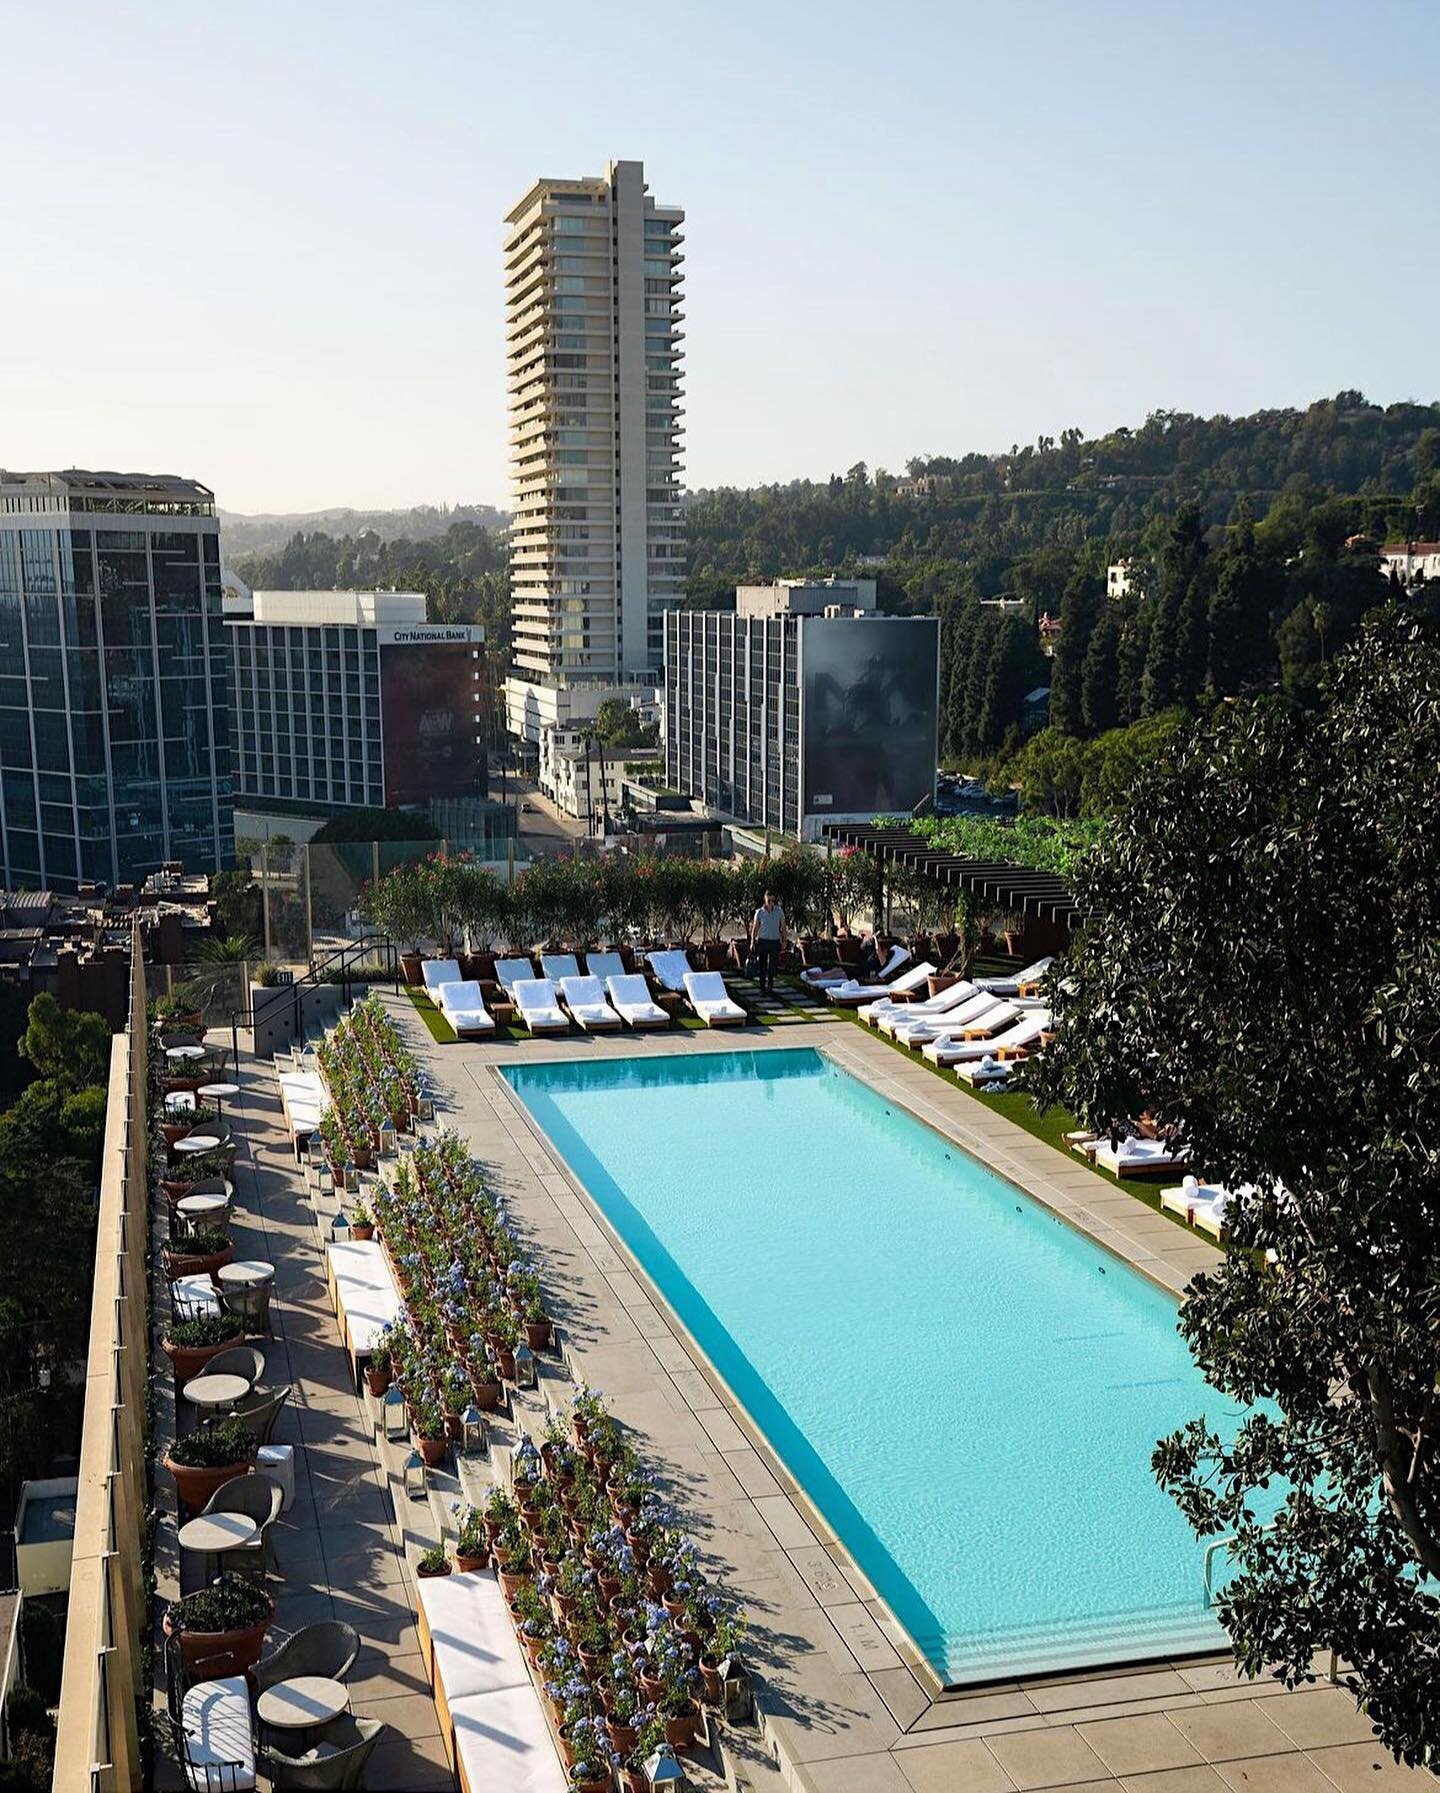 Planning a trip to West Hollywood soon? Discover the essence of luxury at @wehoedition.

Perched over Sunset Boulevard, guests enjoy sweeping views of Hollywood Hills, Beverly Hills, &amp; the iconic LA skyline while lounging by the pool surrounded b